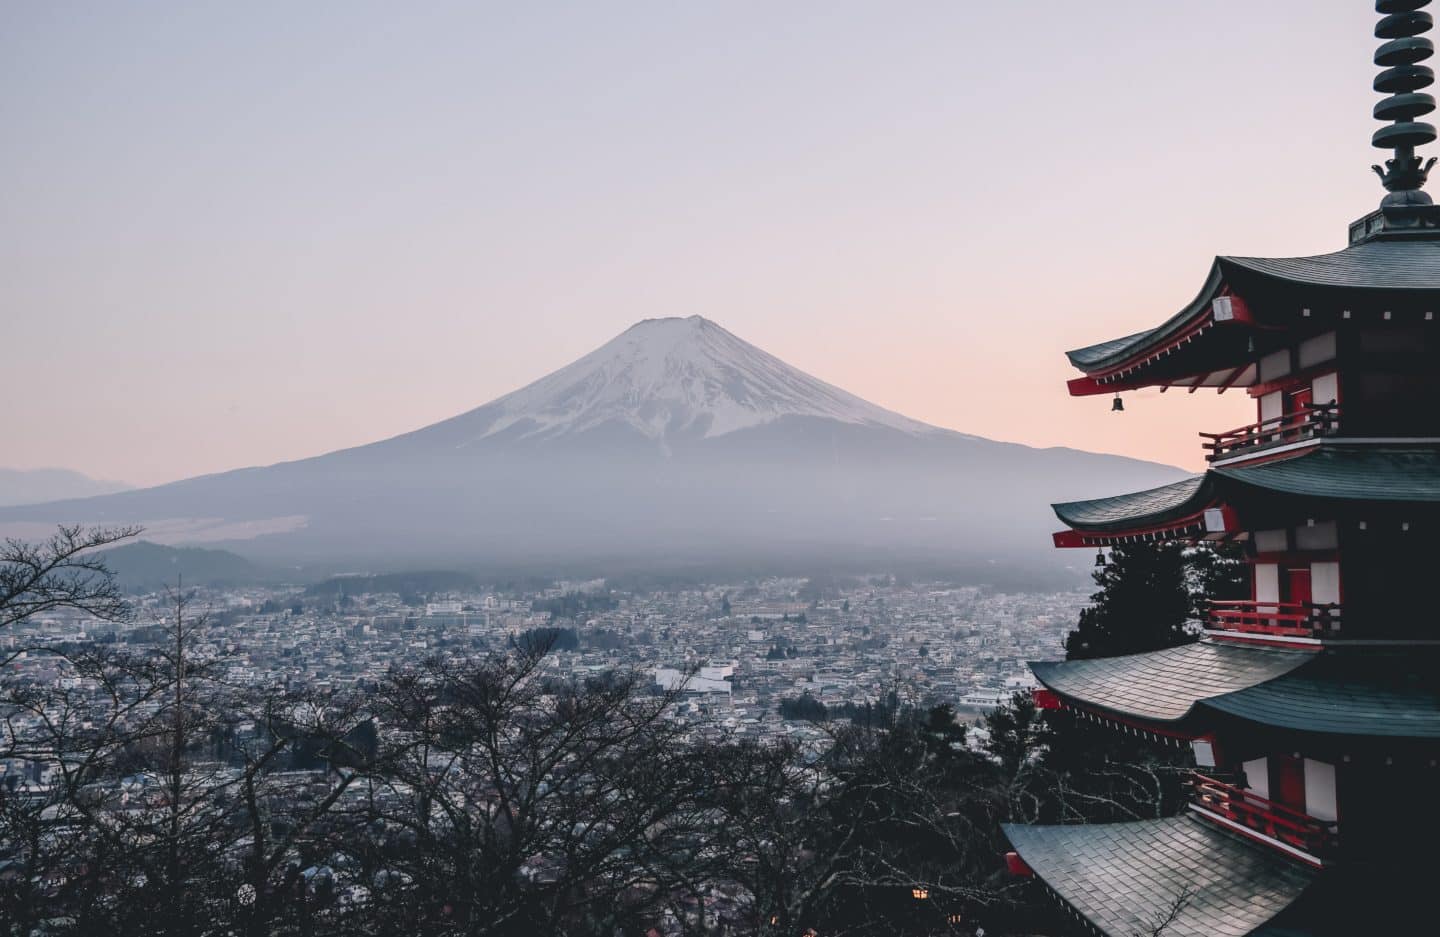 FOUR TIMES UP MT FUJI & THESE ARE MY TIPS  ( A GUEST POST BY LENA VOTH)